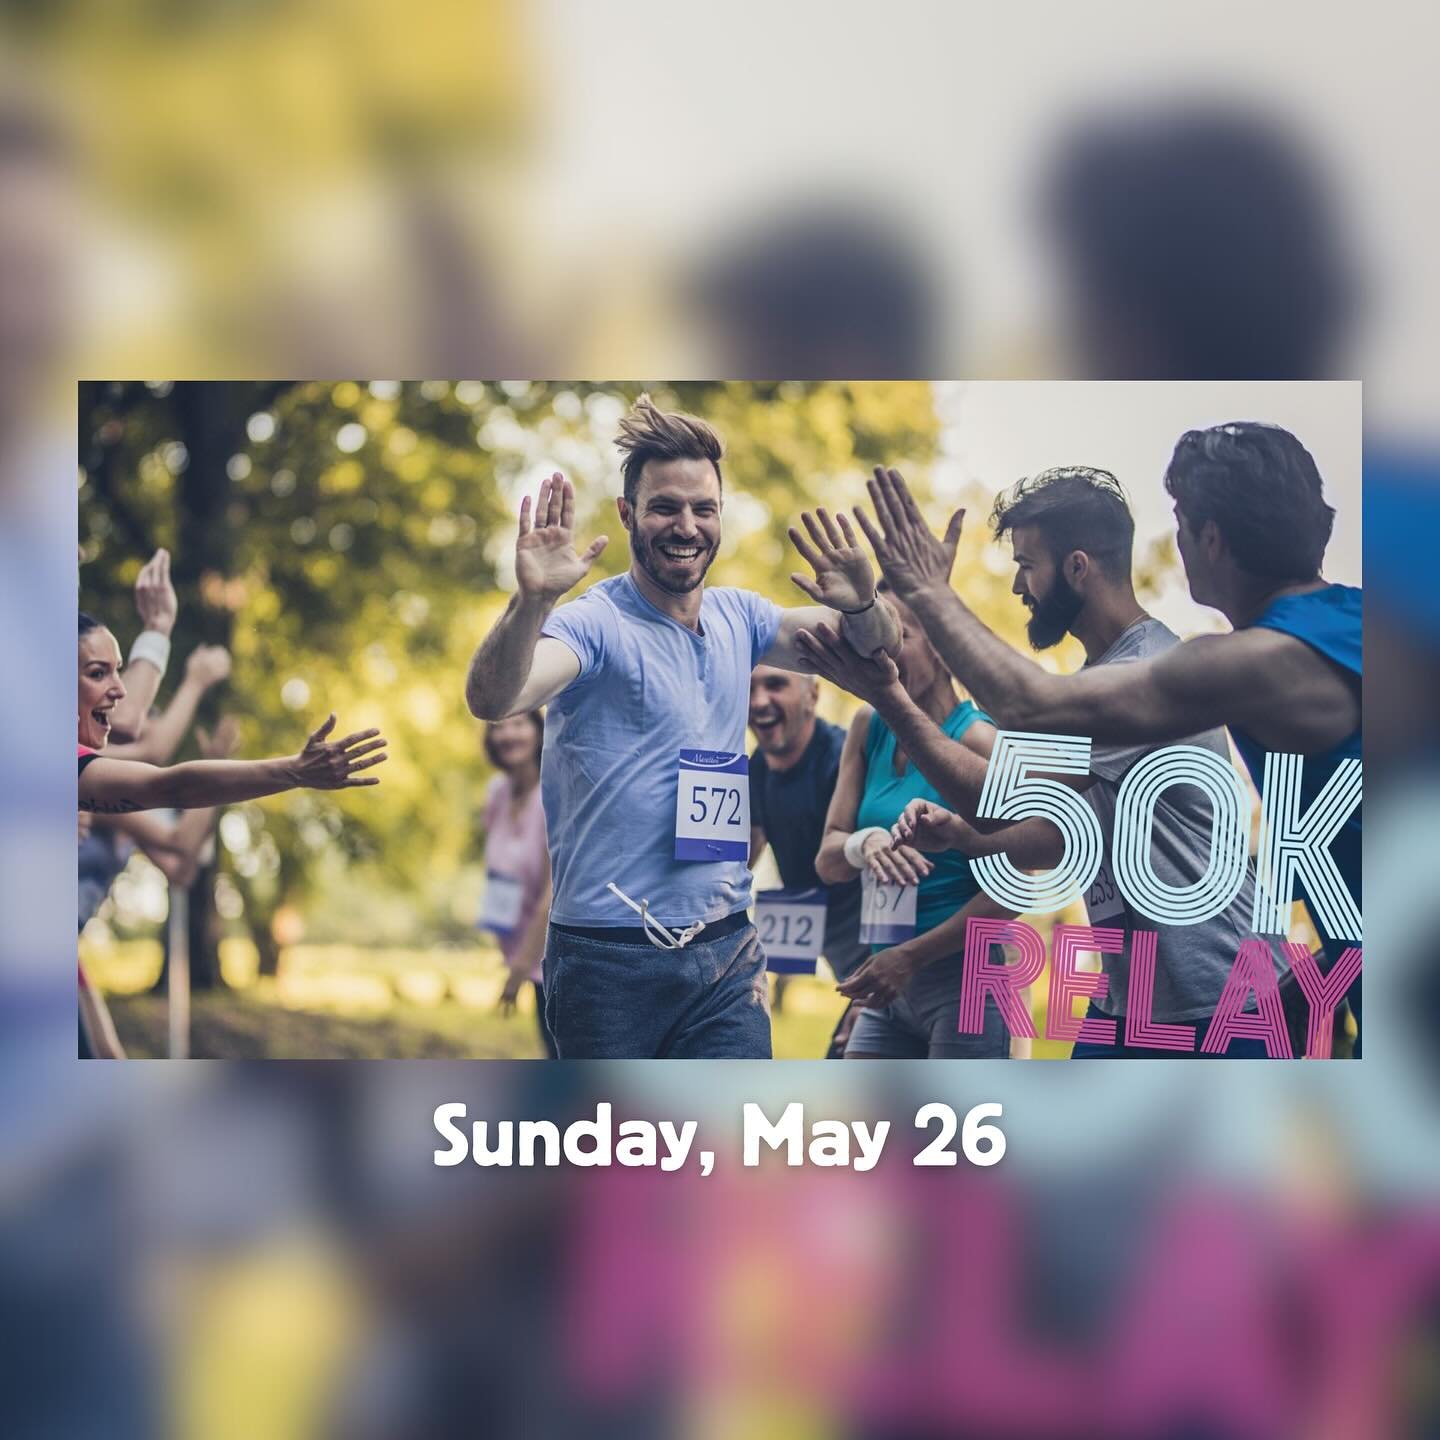 We&rsquo;re just over one week away from the 50K Relay + 50K Solo &amp; 10K Fun Run! It&rsquo;s an event we&rsquo;re always having fun at and a great time to partner up with friends!! 

For more info on the relay or other Pasadena Running Co. races h